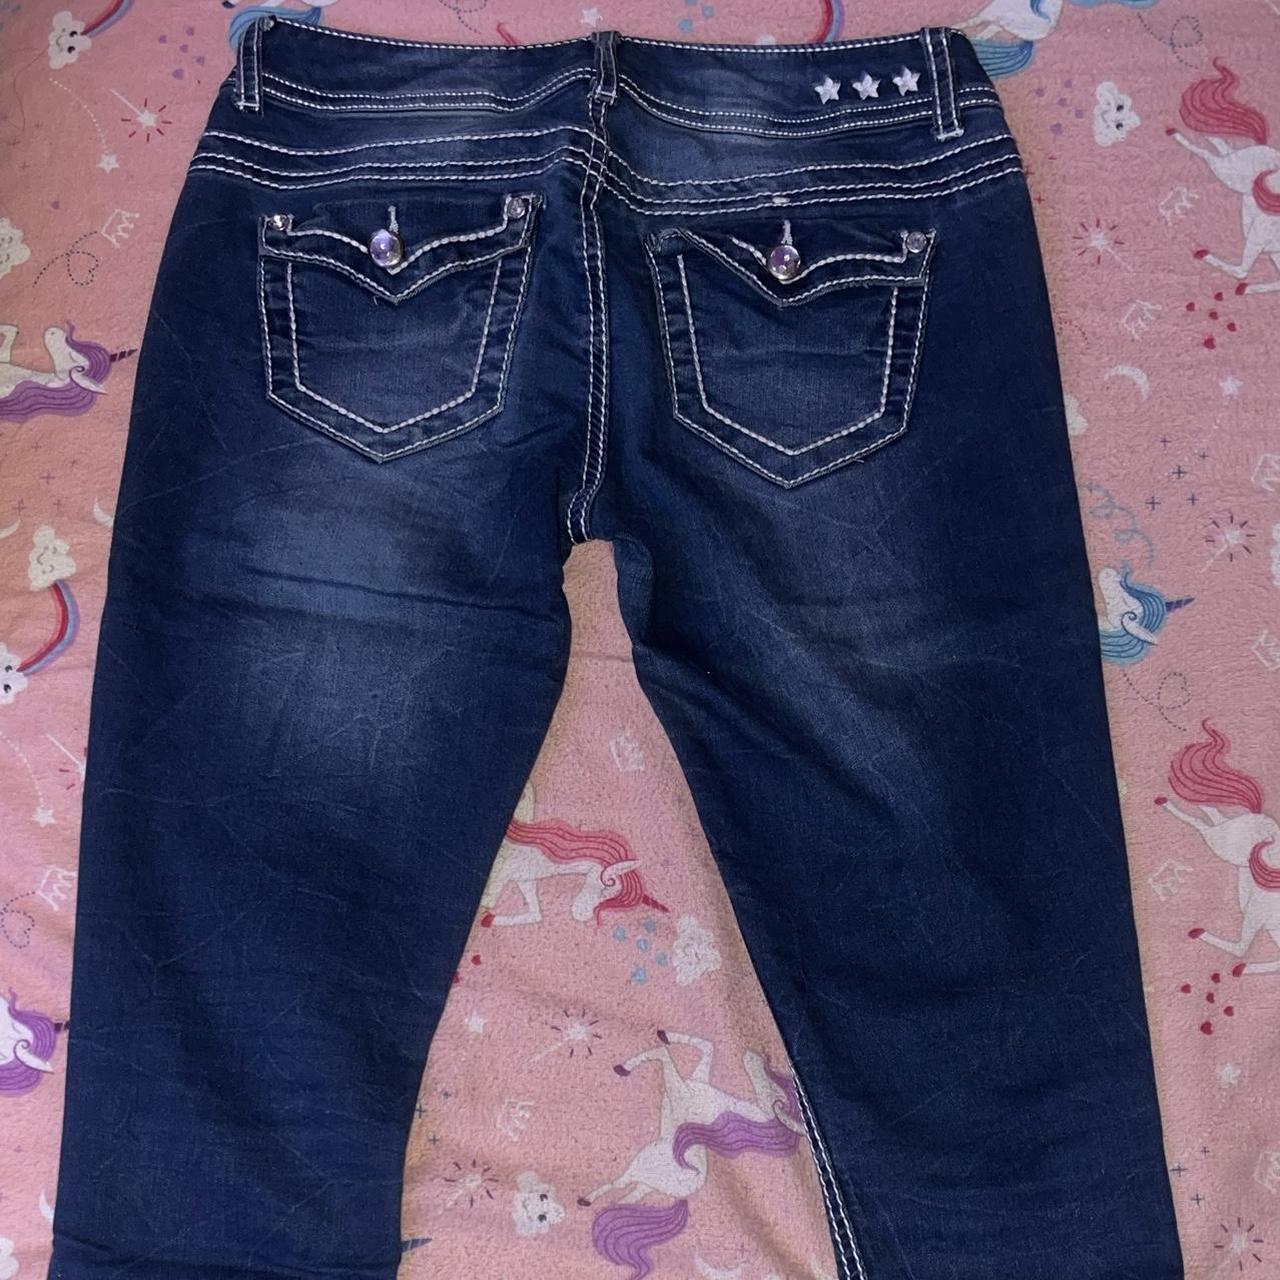 Vanilla star jeans size 1. Brand new and never worn.... - Depop